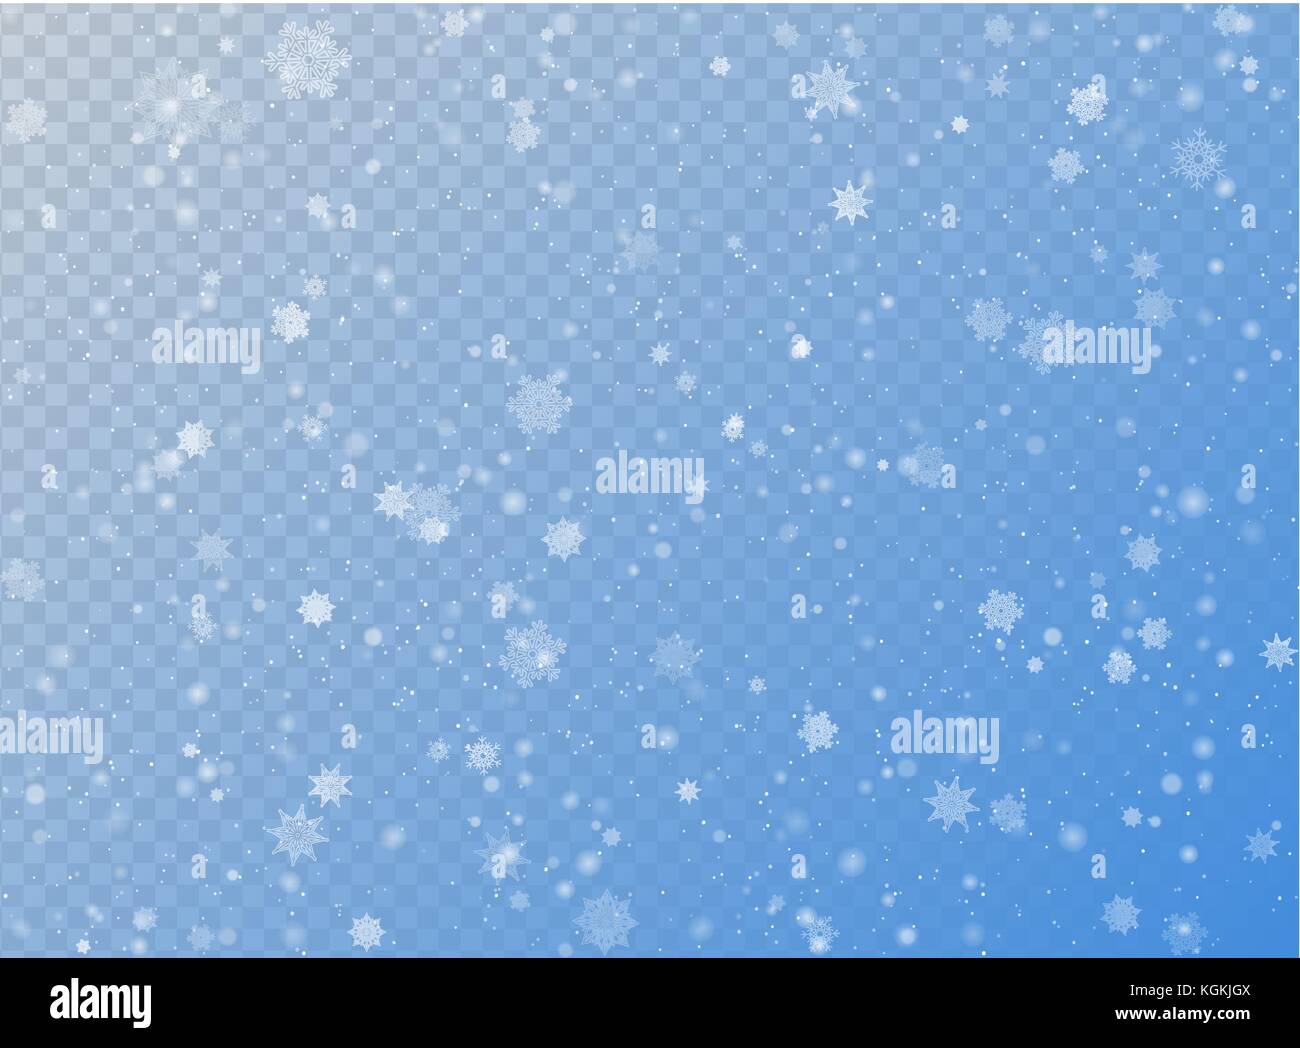 Seamless vector white snowfall effect on blue transparent horizontal background. Overlay snow flake Christmas or New Year winter effect. Elegant snowf Stock Vector